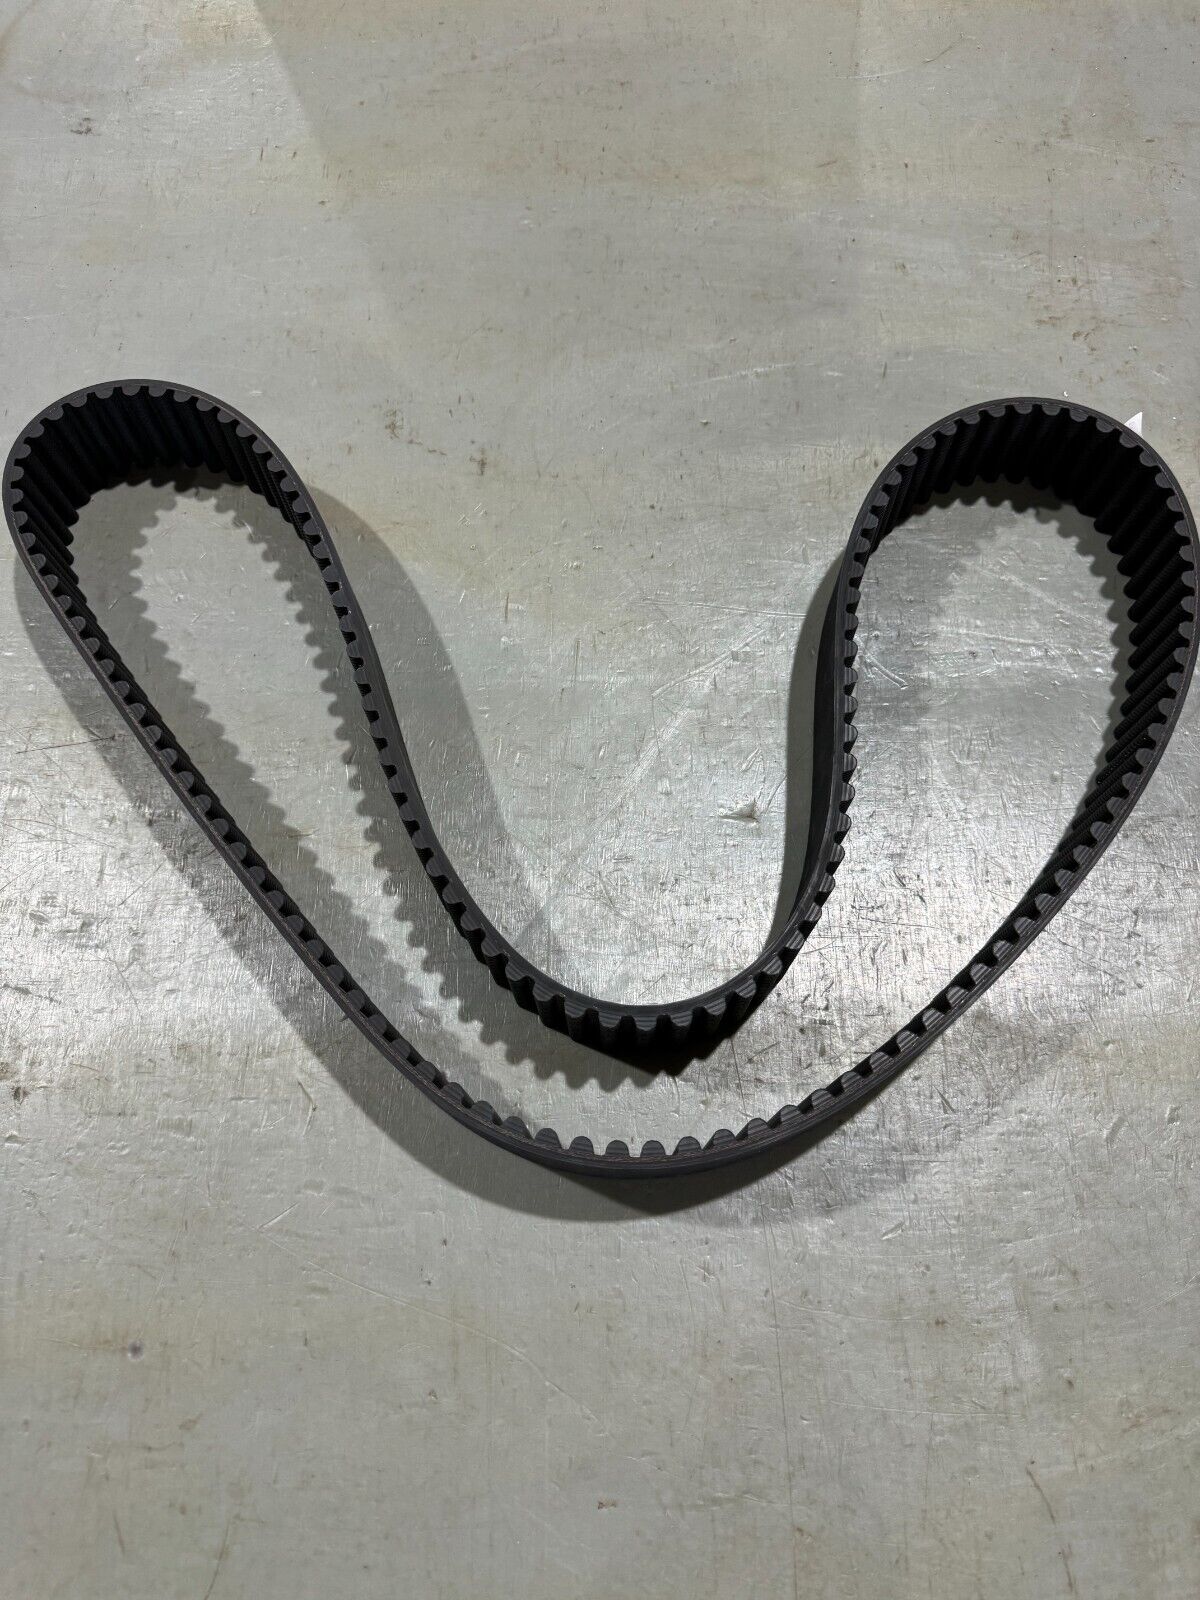 FACTORY NEW GOODYEAR SYNCHRONOUS Sync HTD TIMING BELT 1890-14M-55